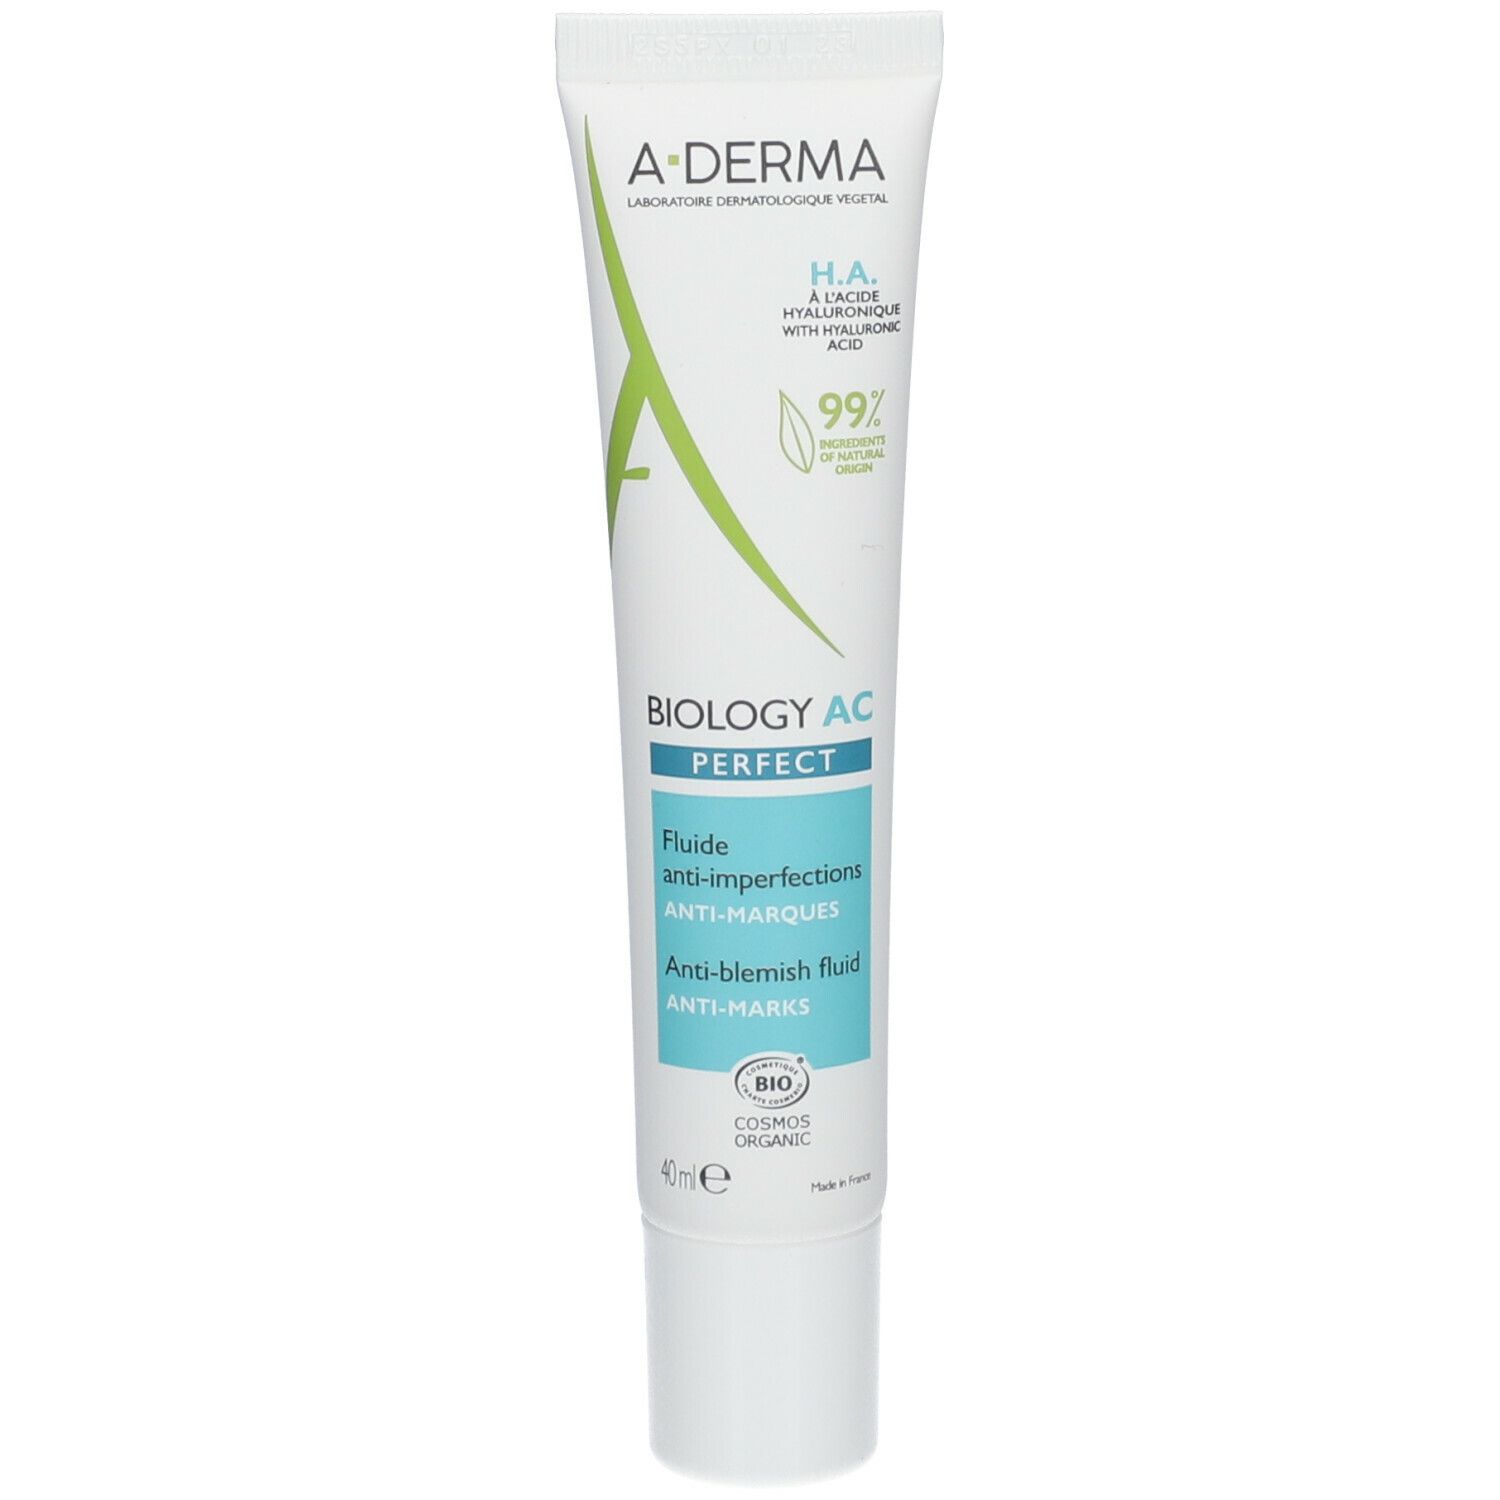 A-Derma Biology AC Perfect Fluide anti-imperfections anti-marques